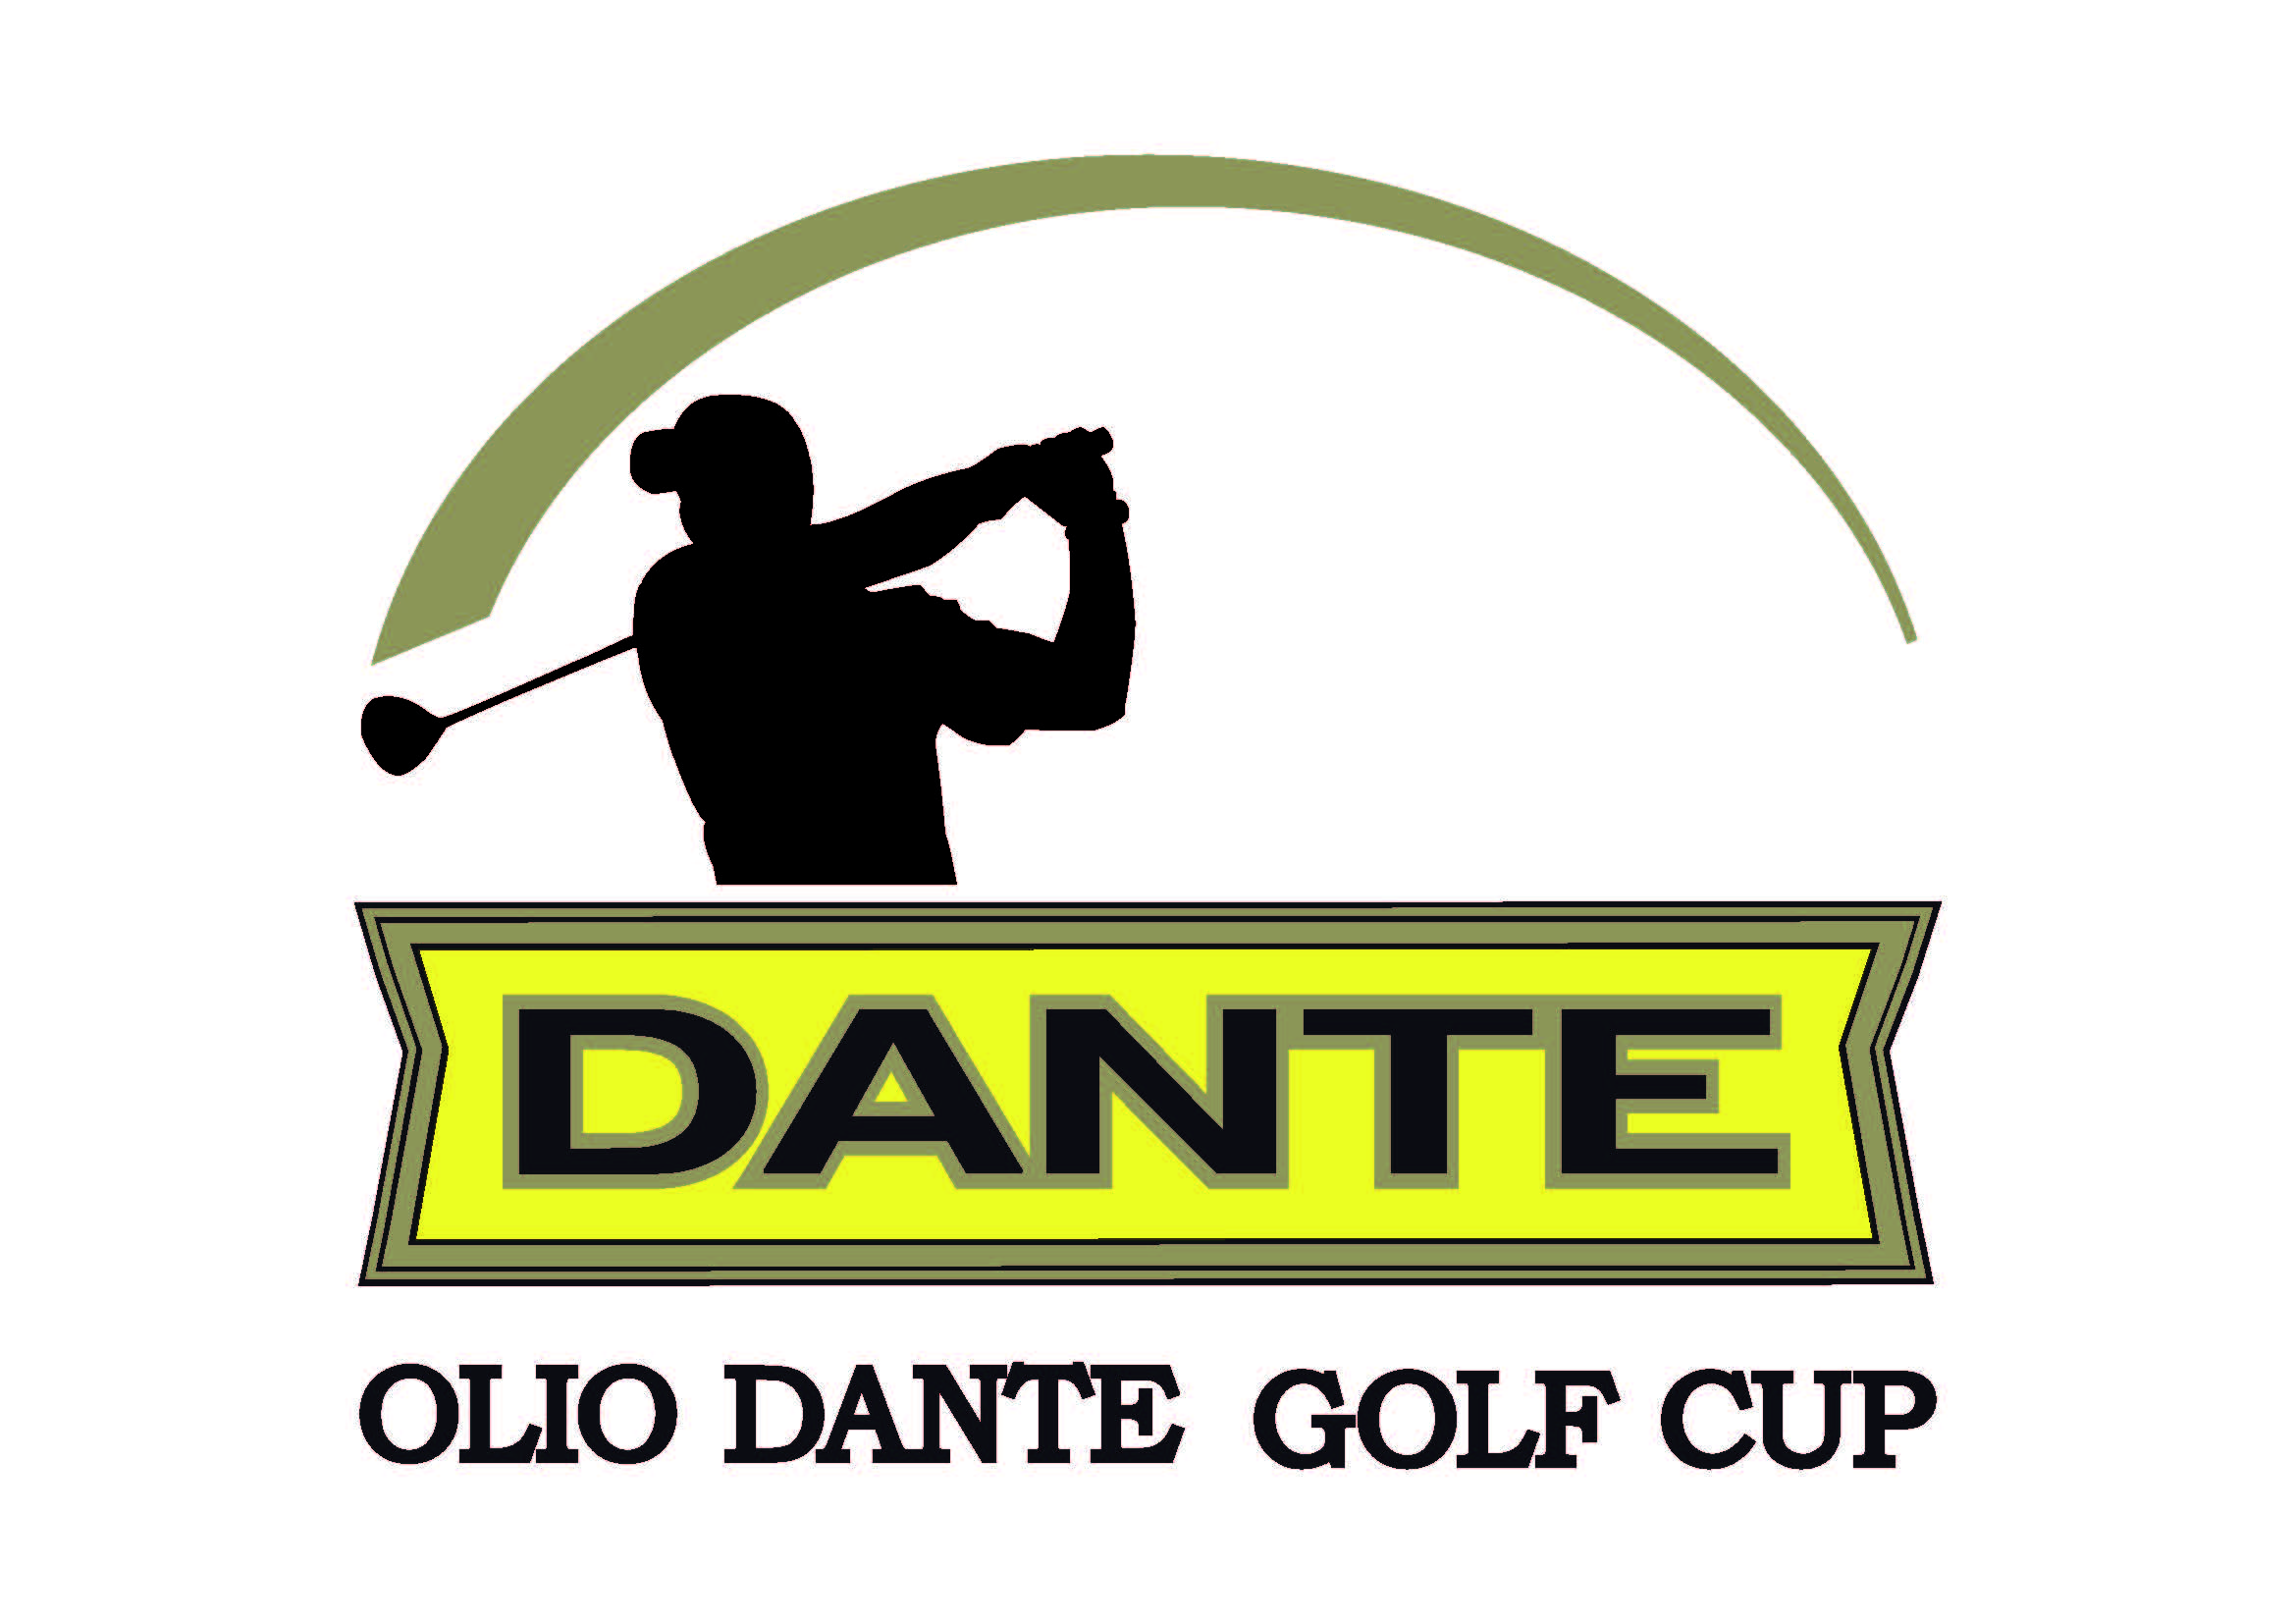 OLIO DANTE GOLF CUP, THE FINAL MATCH AT TOLCINASCO CASTLE  AND OPENER OF THE 2022 NEW SEASON